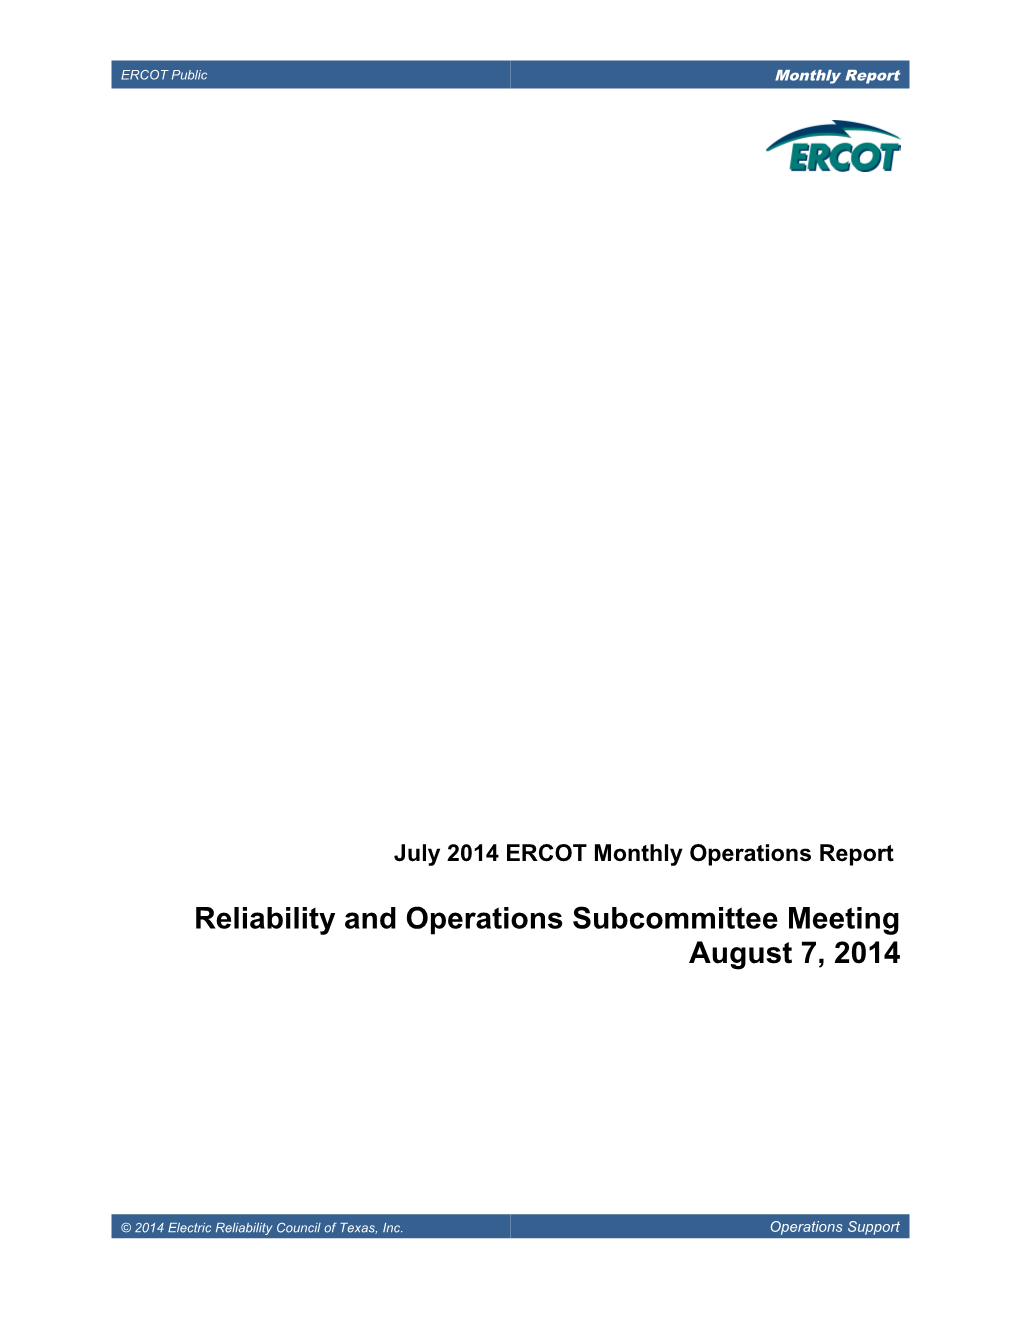 Reliability and Operations Subcommittee Meeting